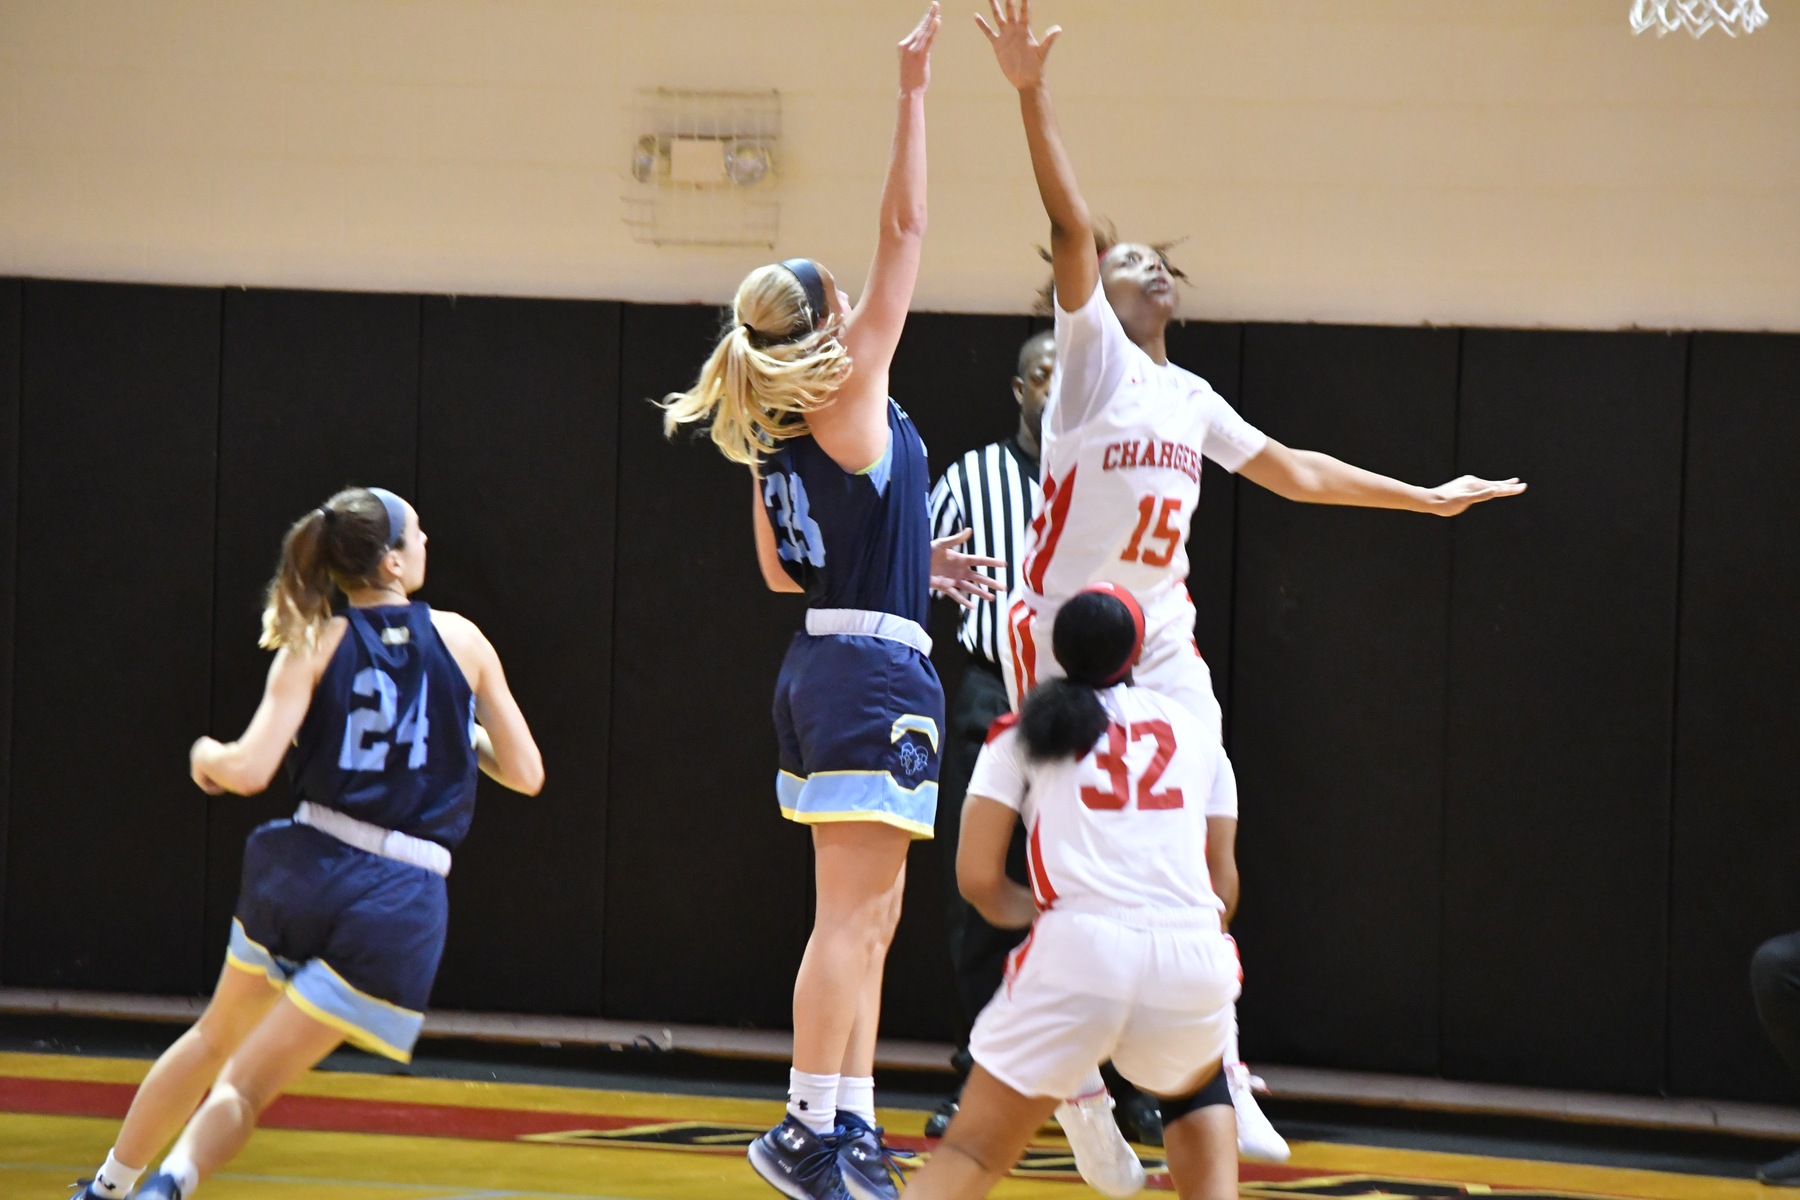 #3S RAMS RALLY TO UPSET #2N LADY CHARGERS